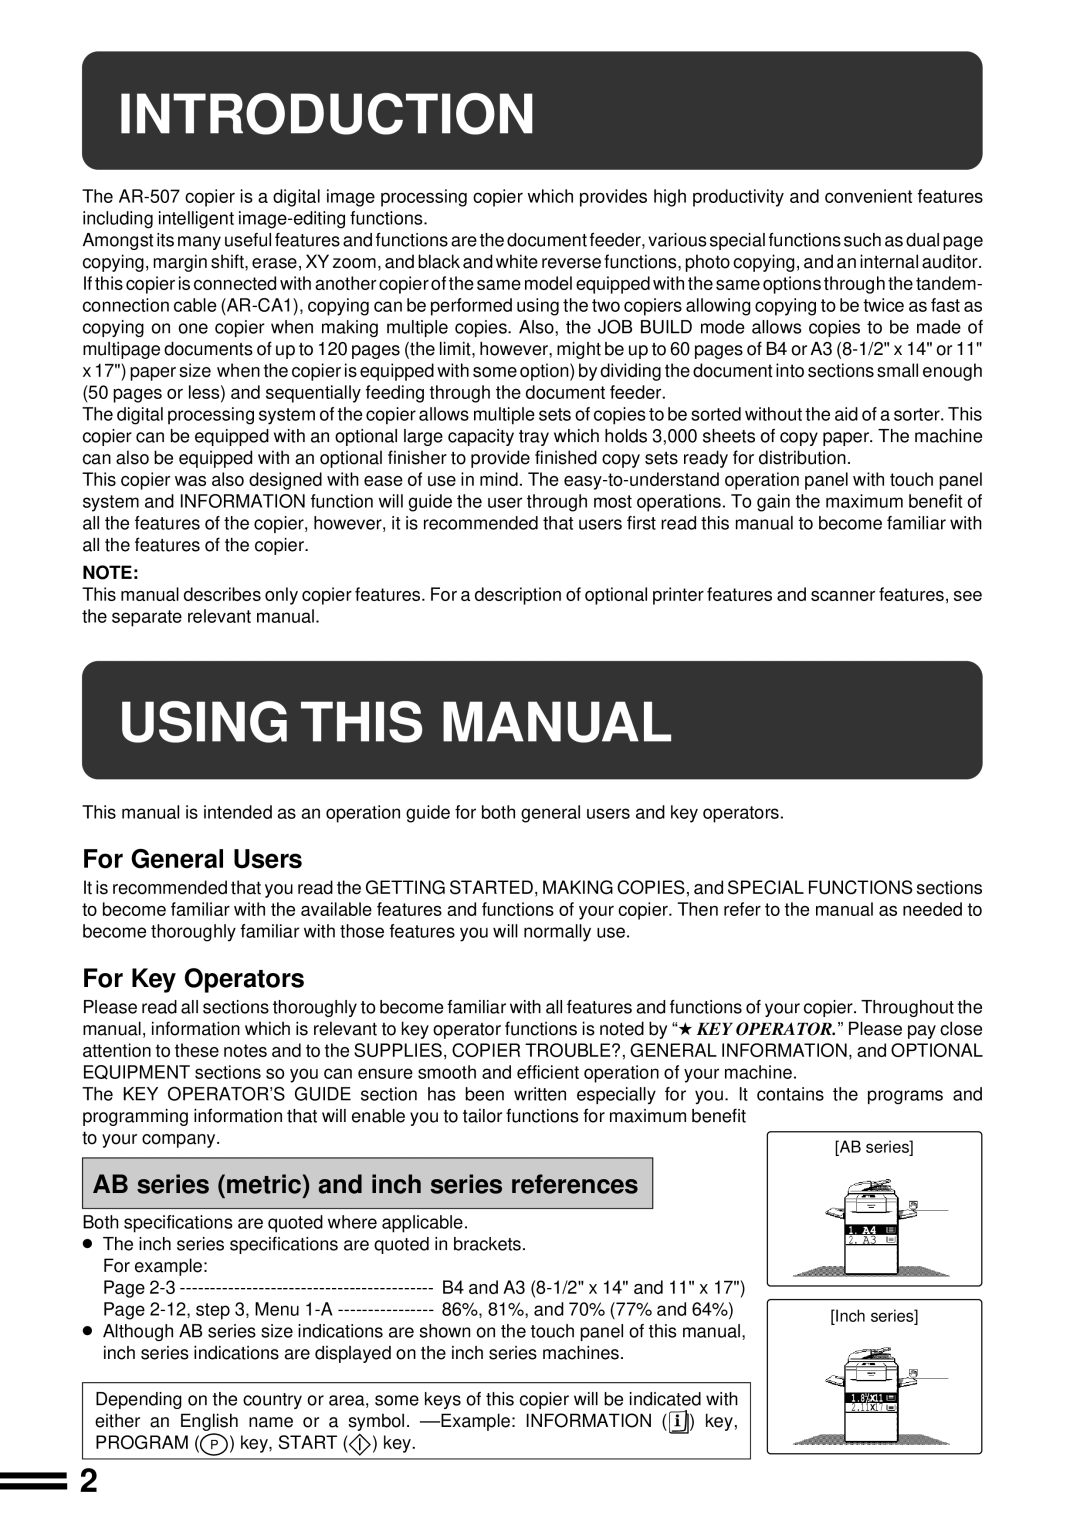 Sharp AR-507 operation manual Introduction, Using This Manual, For General Users, For Key Operators 